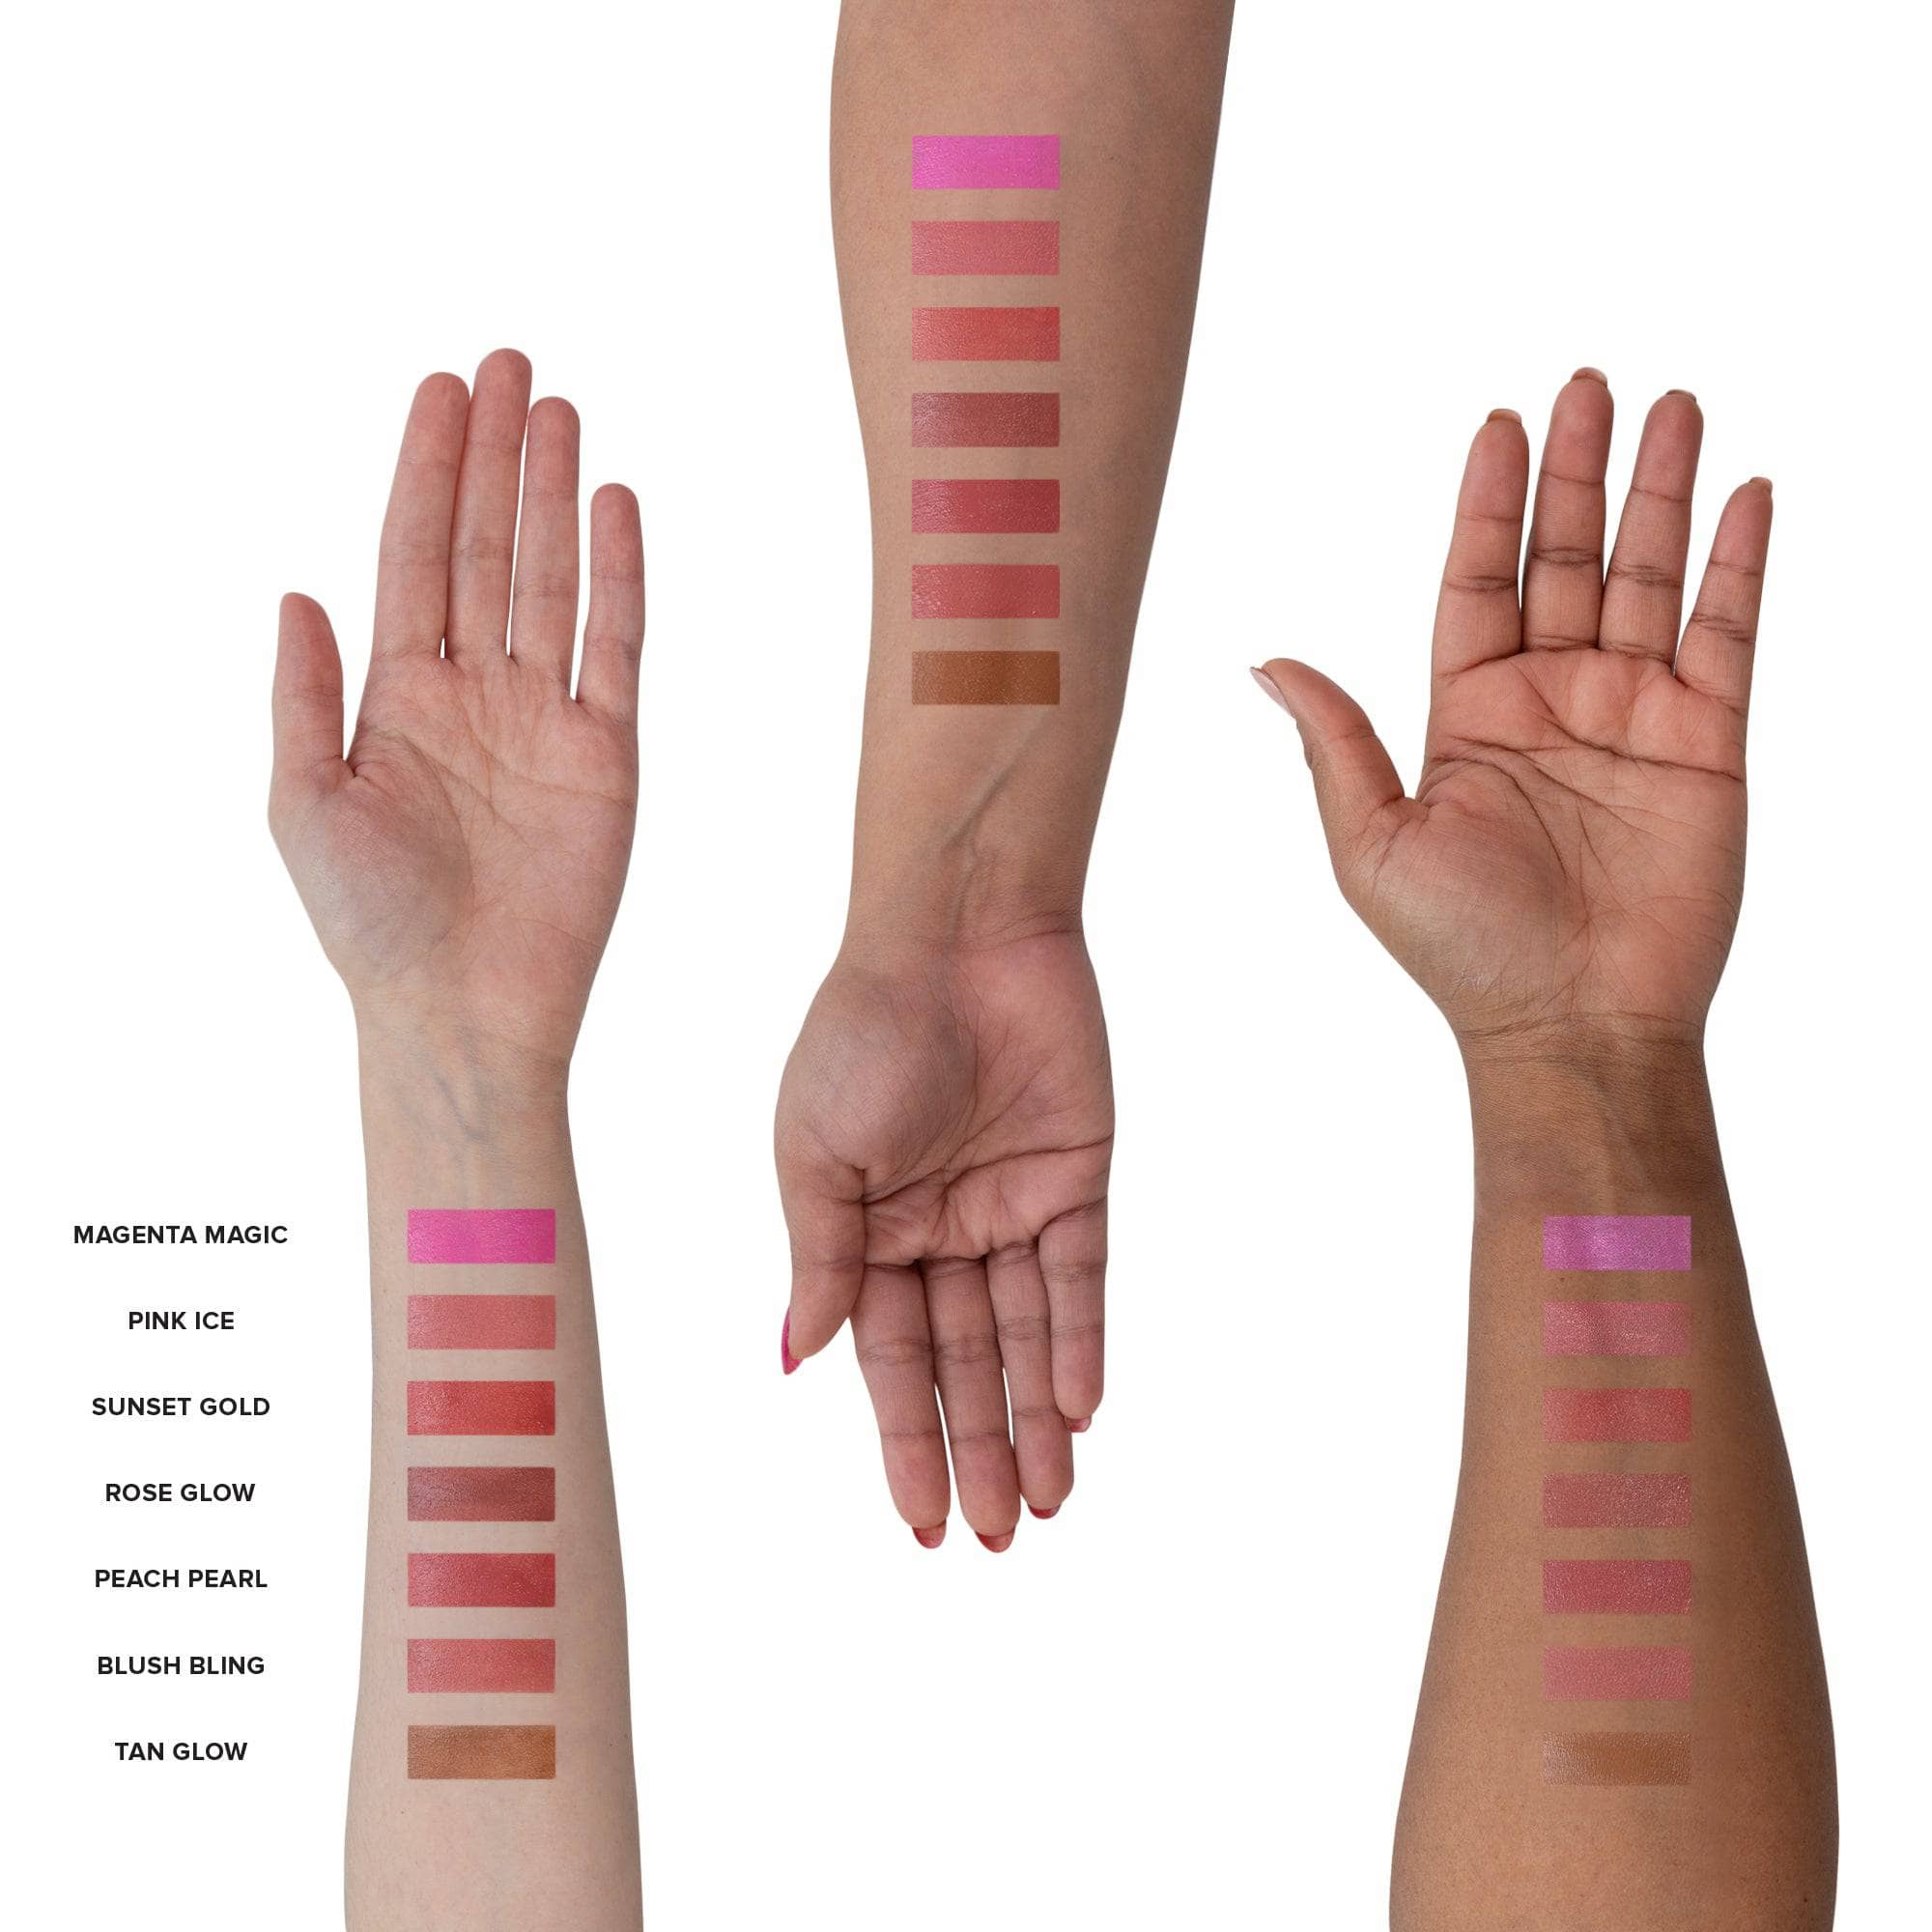 Tan Glow swatches